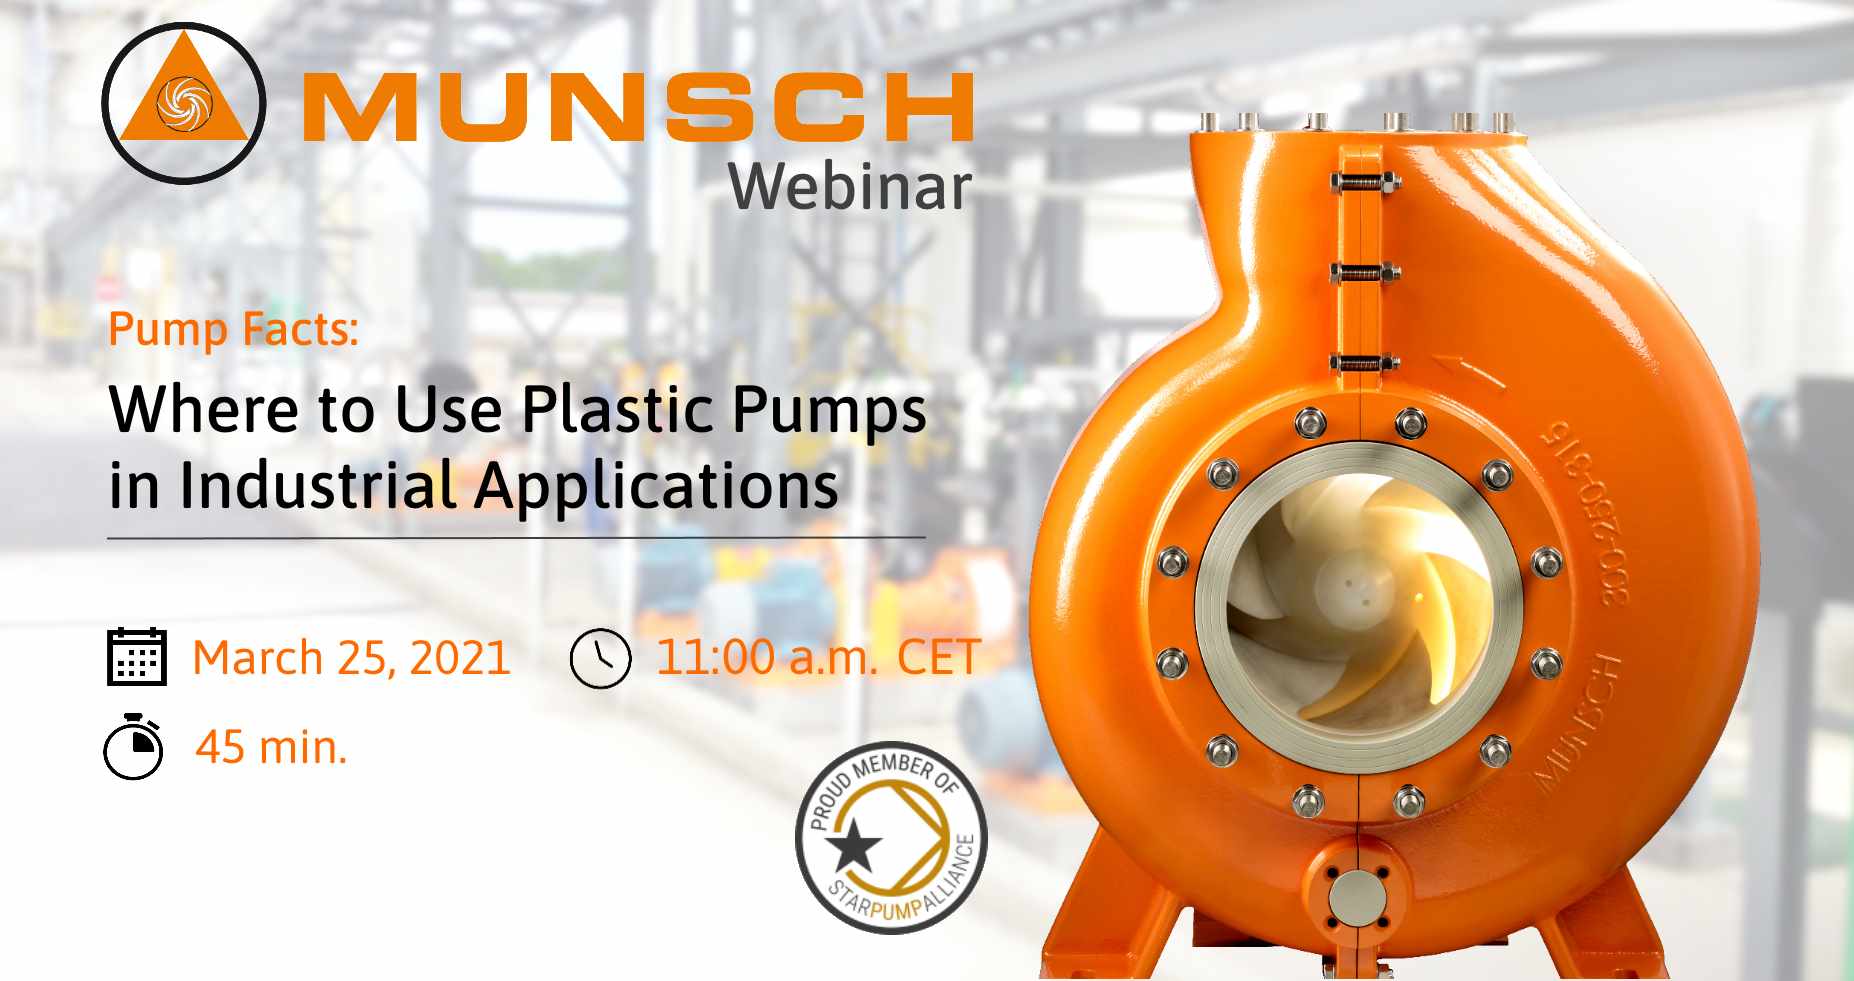 Munsch Pump Webinar: WHERE TO USE PLASTIC PUMPS IN INDUSTRIAL APPLICATIONS  1 - BOWI Pumps & Levels bvba